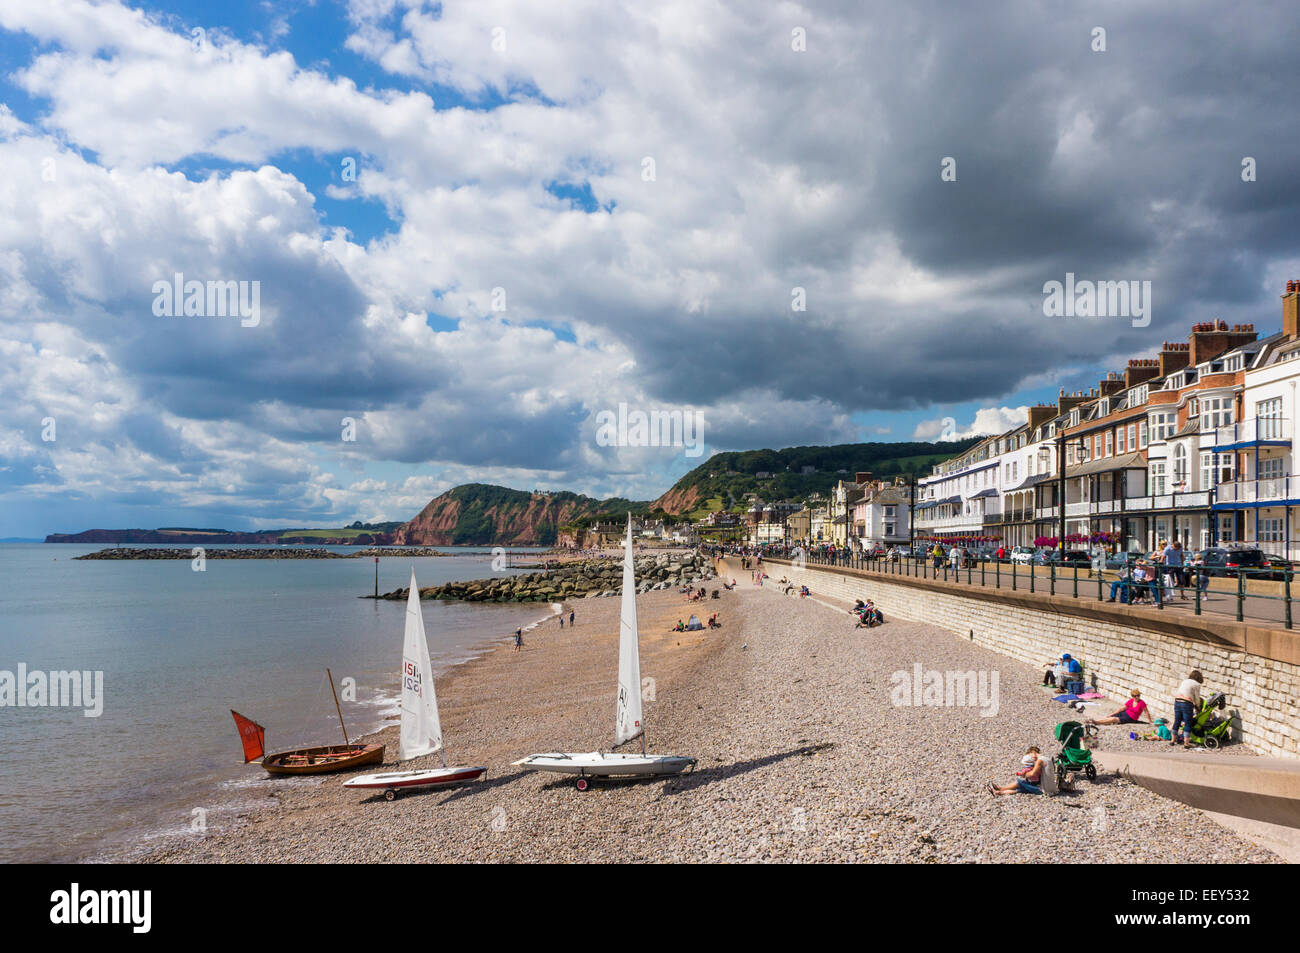 Sidmouth, East Devon, England, UK - seafront, beach and small yachts in summer Stock Photo